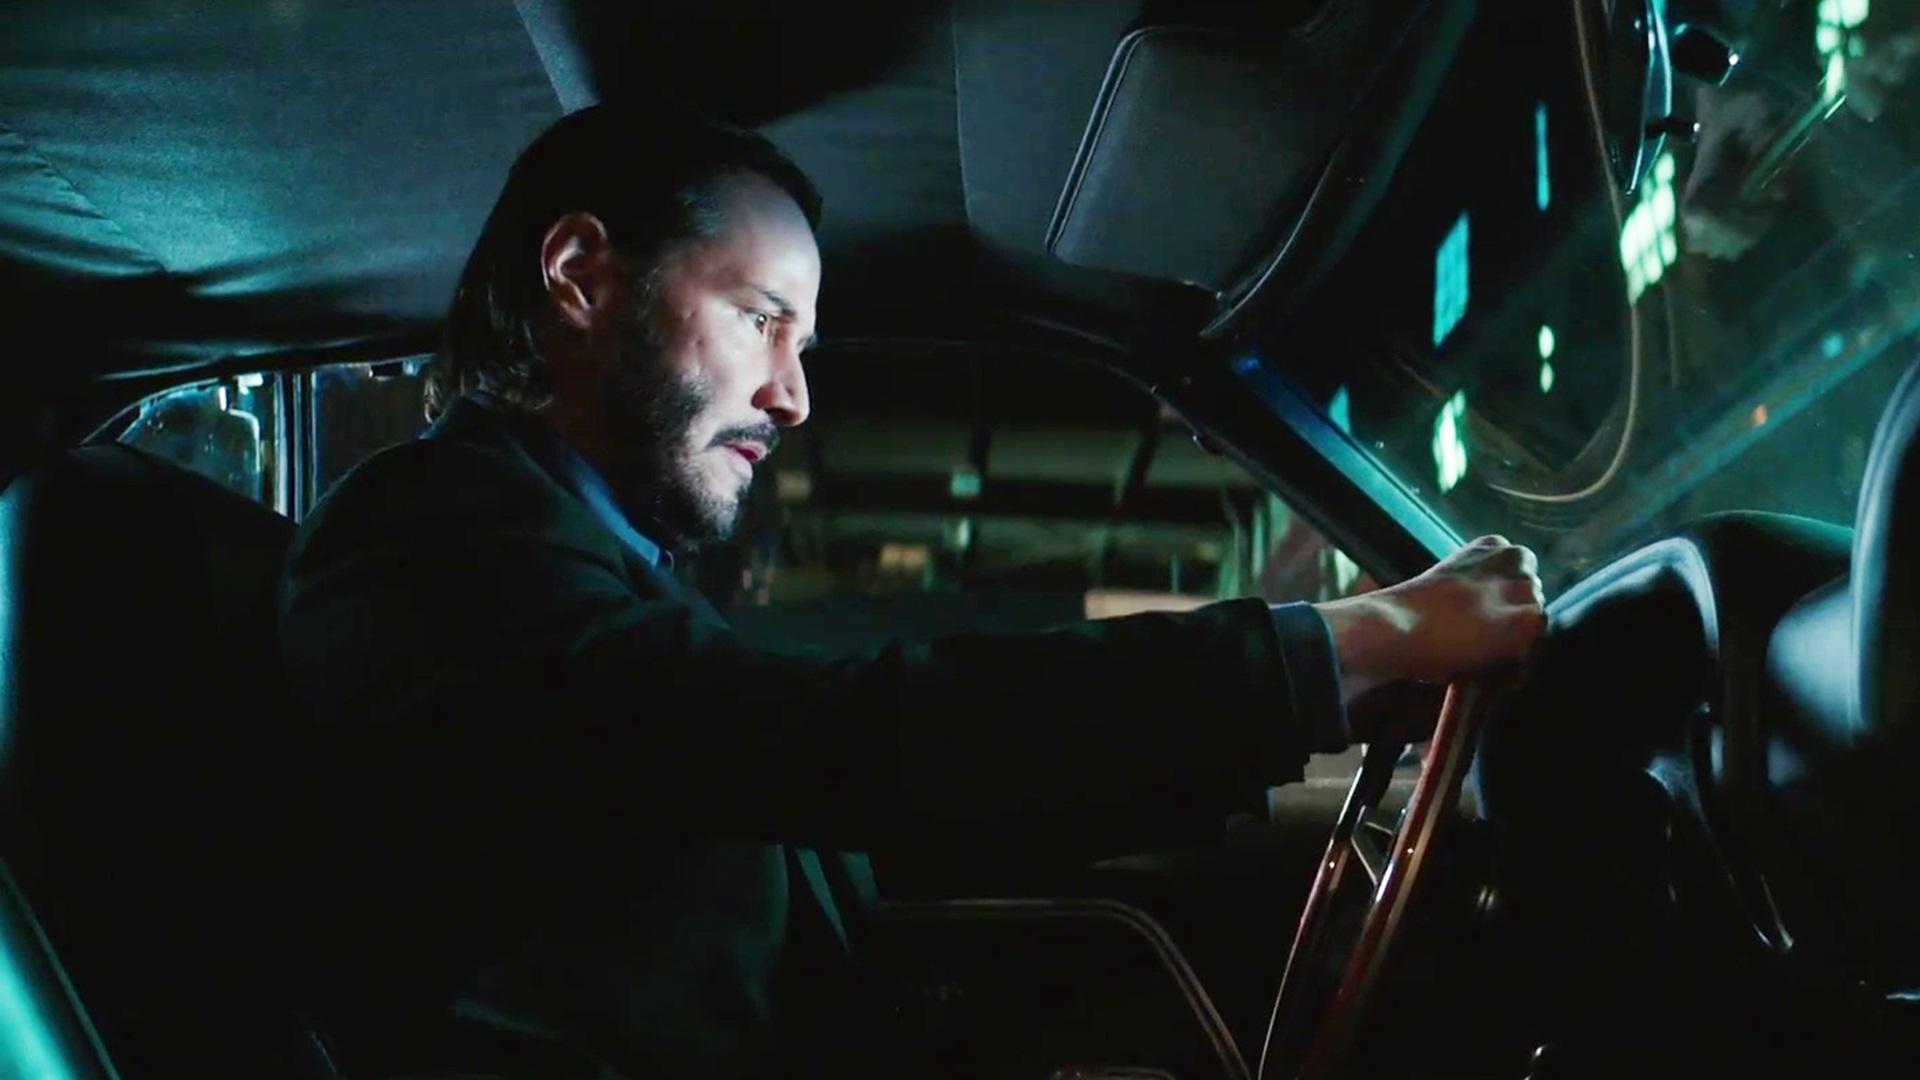 We Have a Release Date For JOHN WICK: CHAPTER 3!